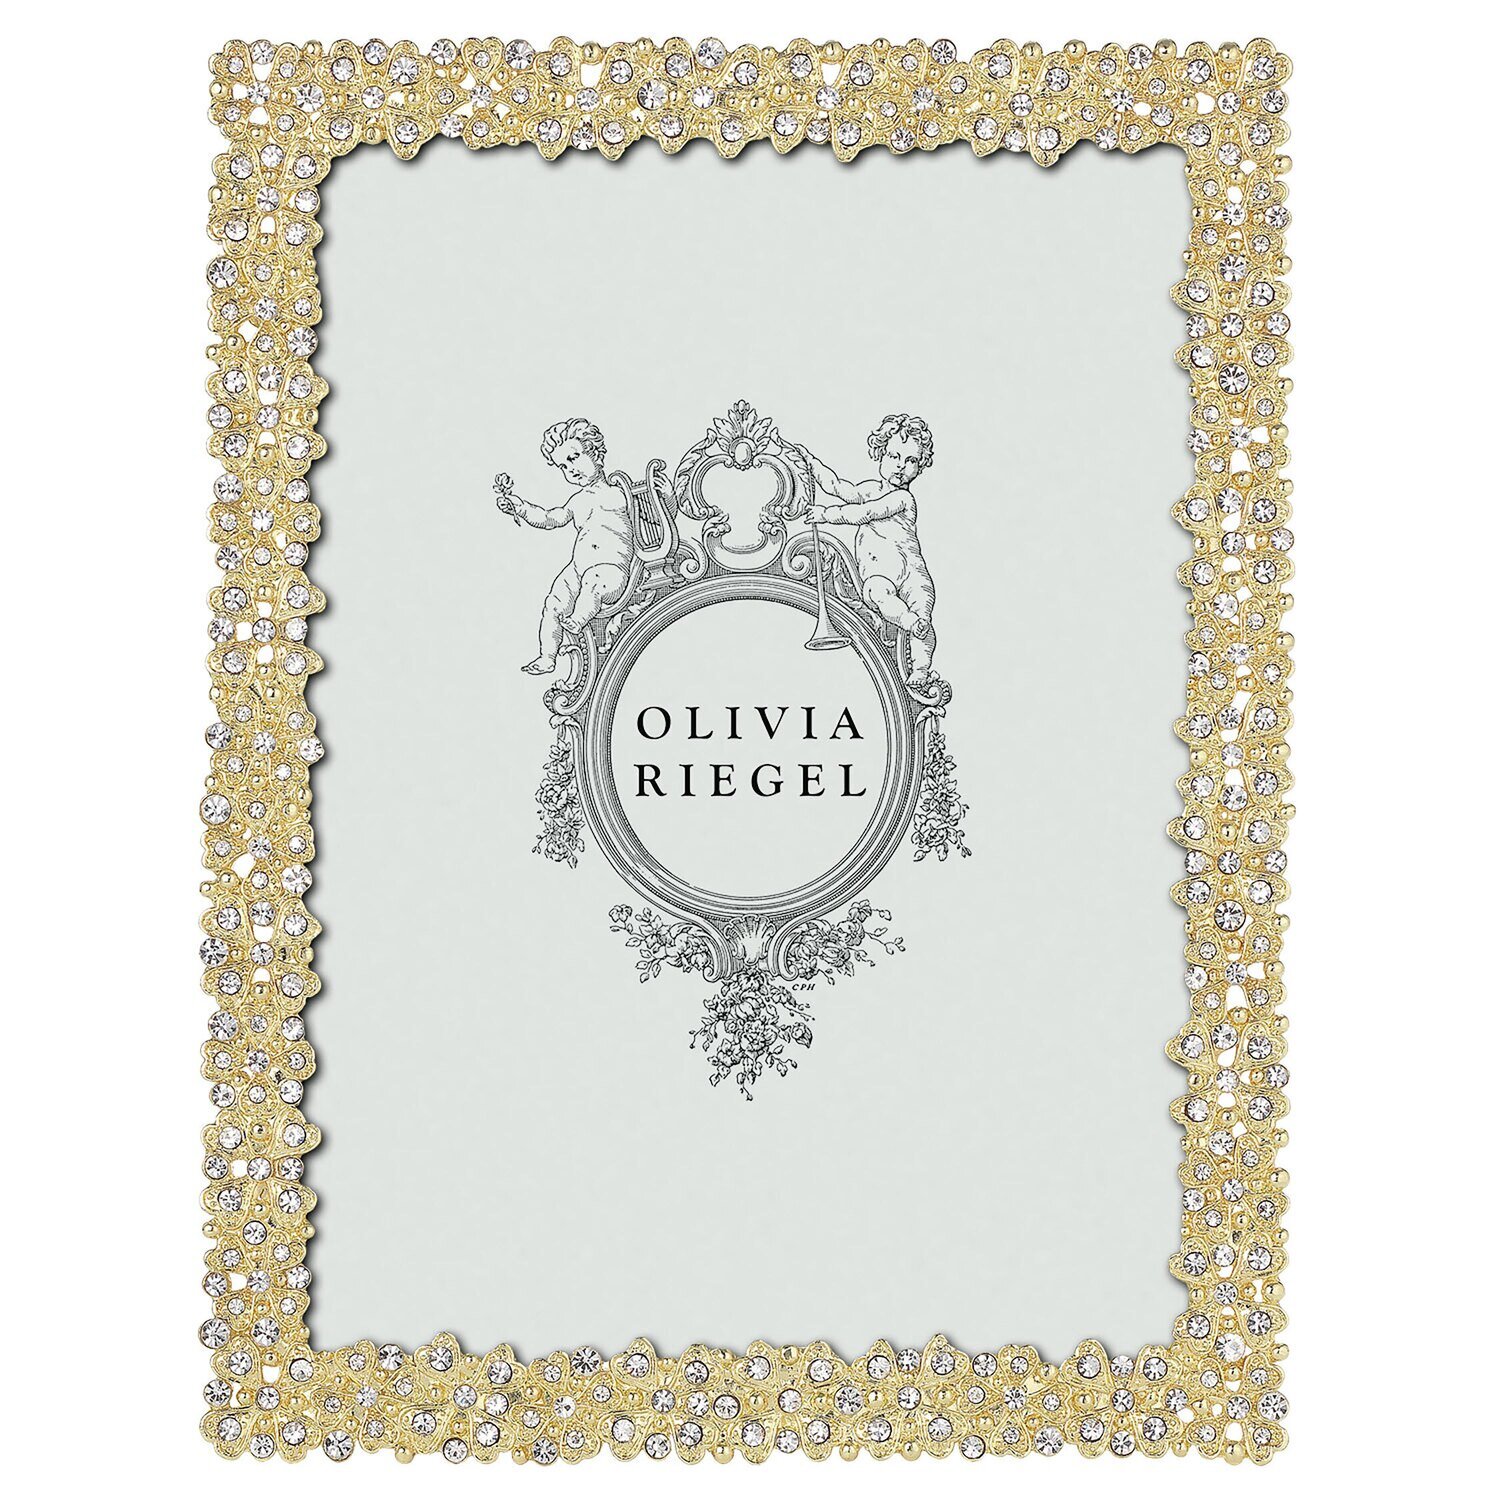 Olivia Riegel Gold Evie 5 x 7 Inch Picture Frame RT4366